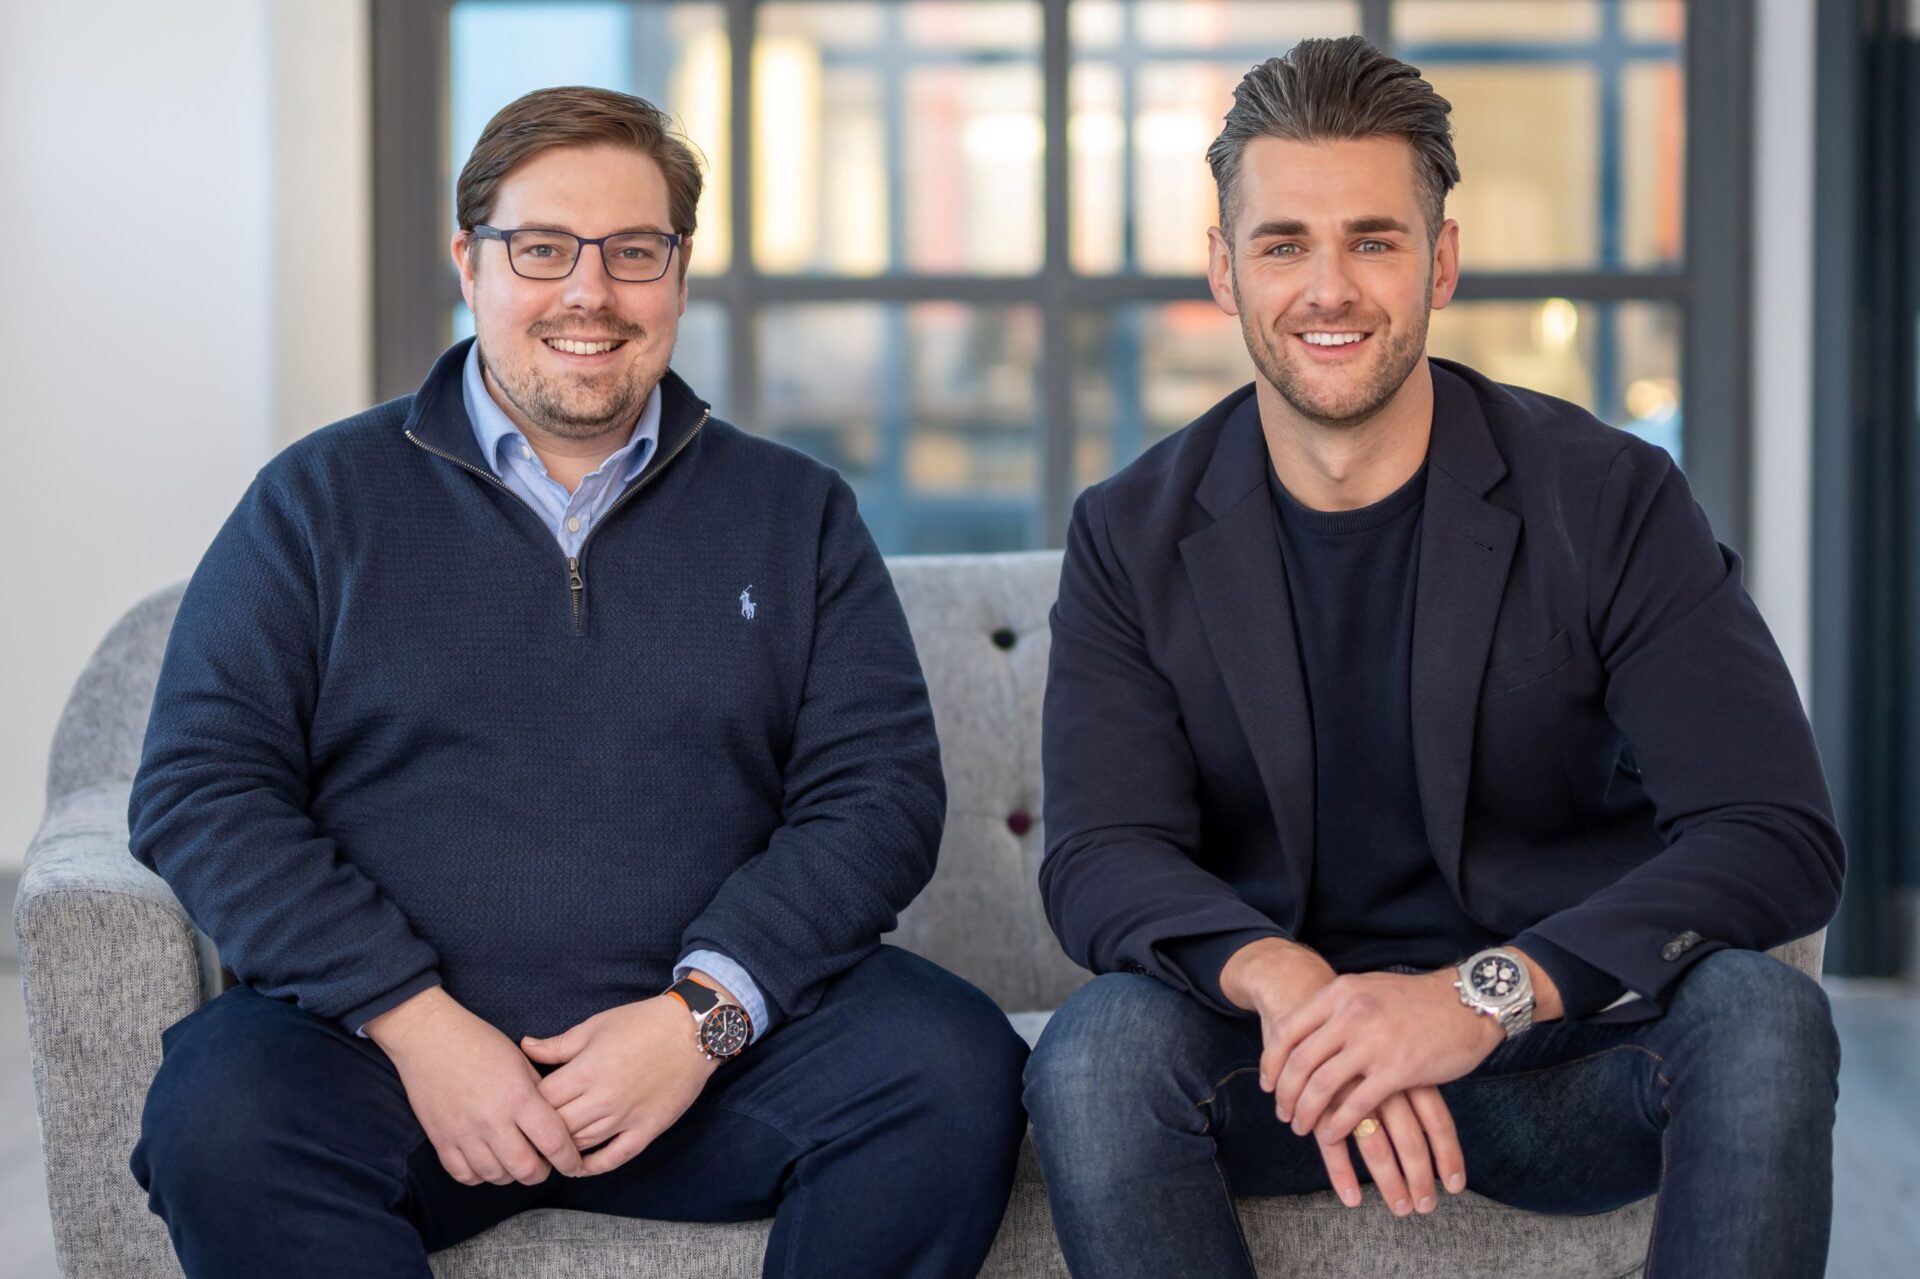 Delio secures $8.3m growth funding to connect private markets on a global scale